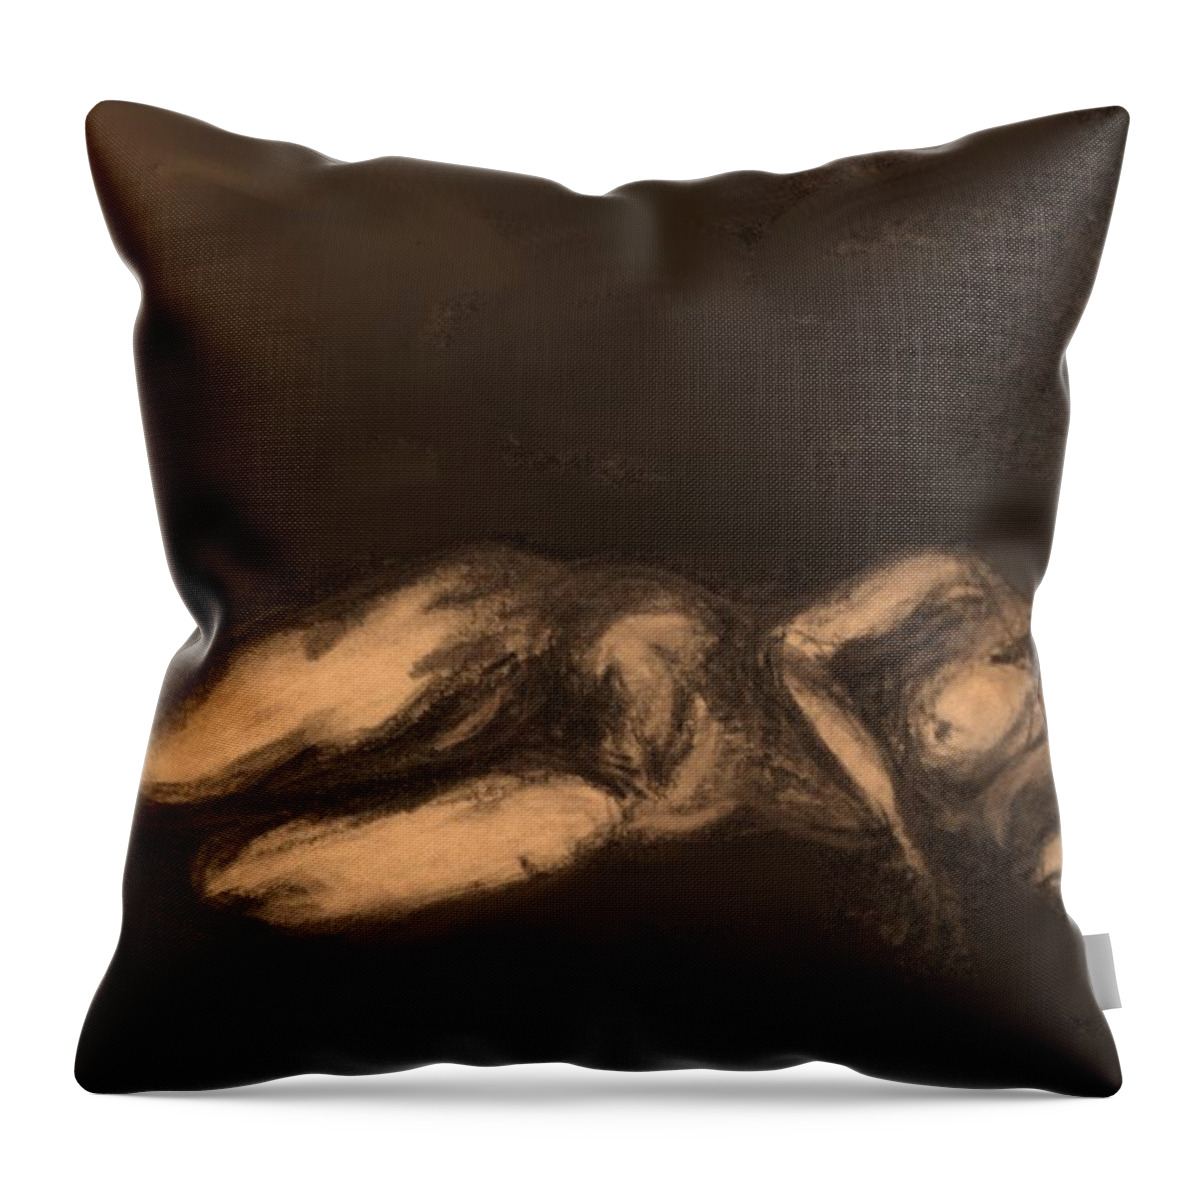 Nude Throw Pillow featuring the drawing Reclining by Ian MacDonald